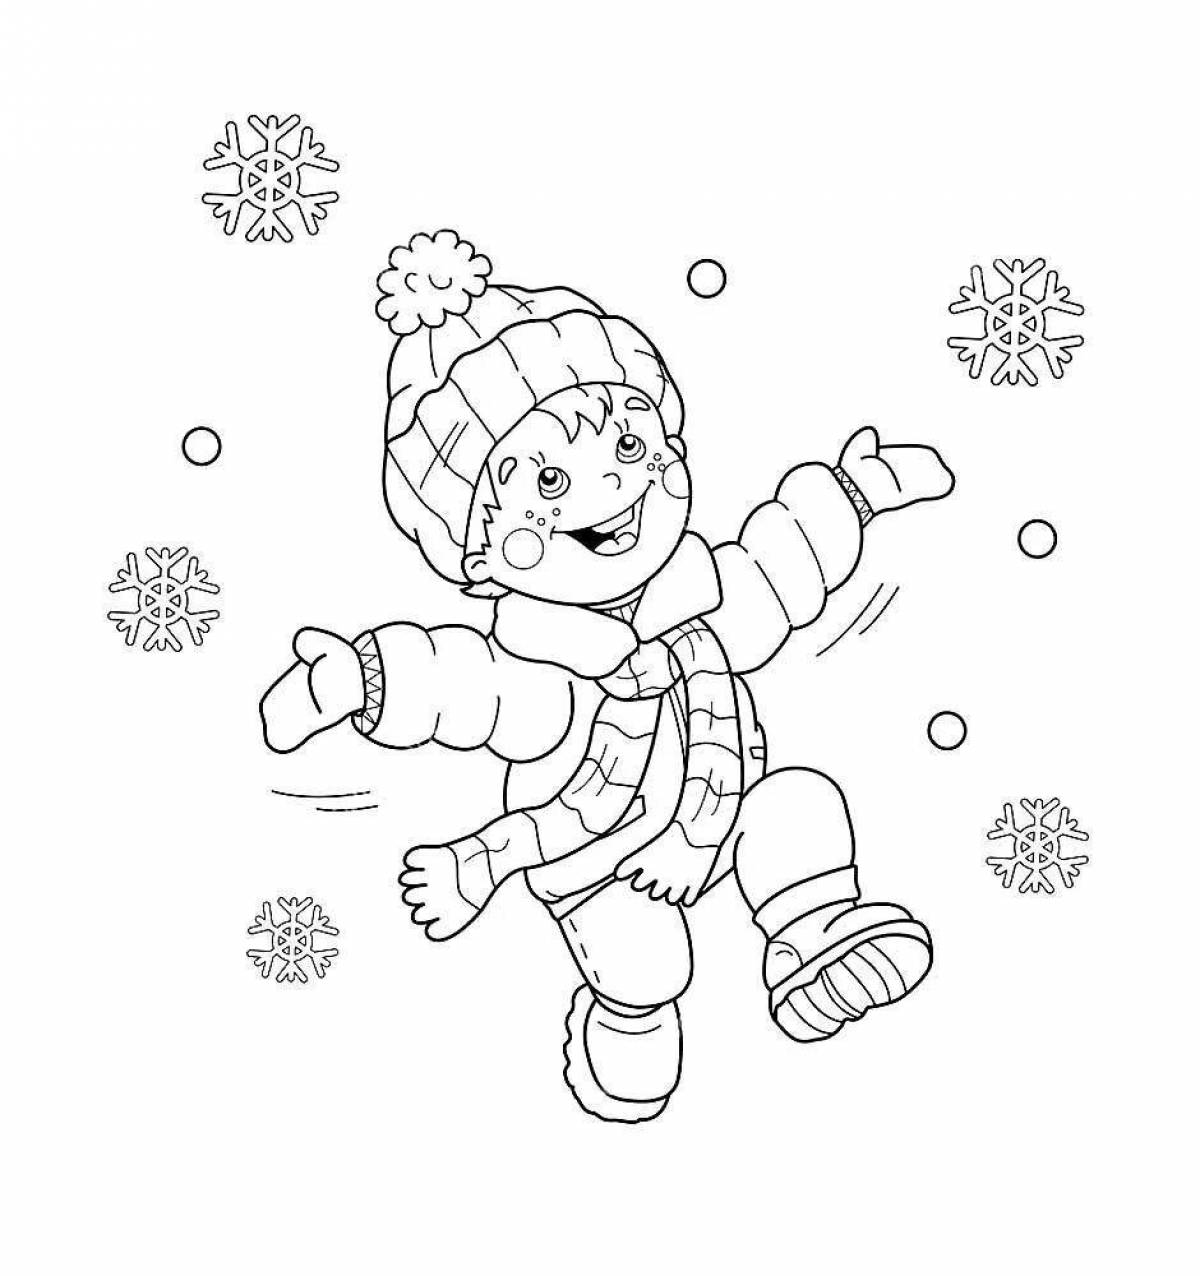 Colorful snowfall coloring book for kids